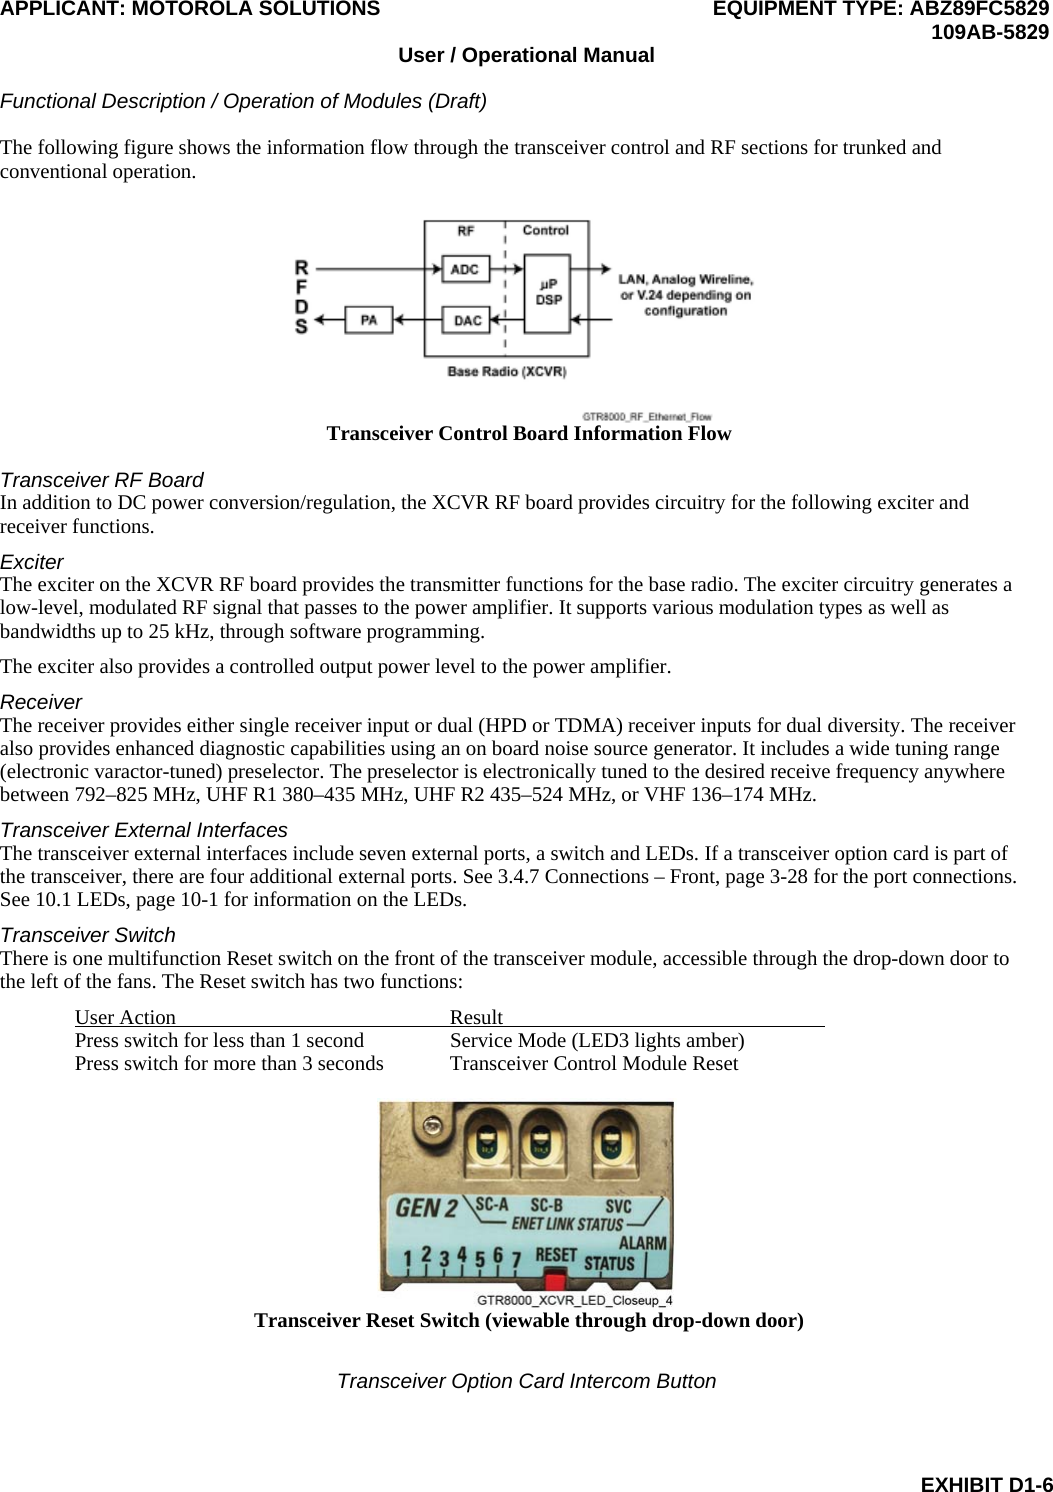 APPLICANT: MOTOROLA SOLUTIONS EQUIPMENT TYPE: ABZ89FC5829 109AB-5829 User / Operational Manual Functional Description / Operation of Modules (Draft) EXHIBIT D1-6 The following figure shows the information flow through the transceiver control and RF sections for trunked and conventional operation. Transceiver Control Board Information Flow Transceiver RF Board In addition to DC power conversion/regulation, the XCVR RF board provides circuitry for the following exciter and receiver functions. Exciter The exciter on the XCVR RF board provides the transmitter functions for the base radio. The exciter circuitry generates a low-level, modulated RF signal that passes to the power amplifier. It supports various modulation types as well as bandwidths up to 25 kHz, through software programming. The exciter also provides a controlled output power level to the power amplifier. Receiver The receiver provides either single receiver input or dual (HPD or TDMA) receiver inputs for dual diversity. The receiver also provides enhanced diagnostic capabilities using an on board noise source generator. It includes a wide tuning range (electronic varactor-tuned) preselector. The preselector is electronically tuned to the desired receive frequency anywhere between 792–825 MHz, UHF R1 380–435 MHz, UHF R2 435–524 MHz, or VHF 136–174 MHz. Transceiver External Interfaces The transceiver external interfaces include seven external ports, a switch and LEDs. If a transceiver option card is part of the transceiver, there are four additional external ports. See 3.4.7 Connections – Front, page 3-28 for the port connections. See 10.1 LEDs, page 10-1 for information on the LEDs. Transceiver Switch There is one multifunction Reset switch on the front of the transceiver module, accessible through the drop-down door to the left of the fans. The Reset switch has two functions: User Action  Result Press switch for less than 1 second  Service Mode (LED3 lights amber) Press switch for more than 3 seconds  Transceiver Control Module Reset Transceiver Reset Switch (viewable through drop-down door) Transceiver Option Card Intercom Button 